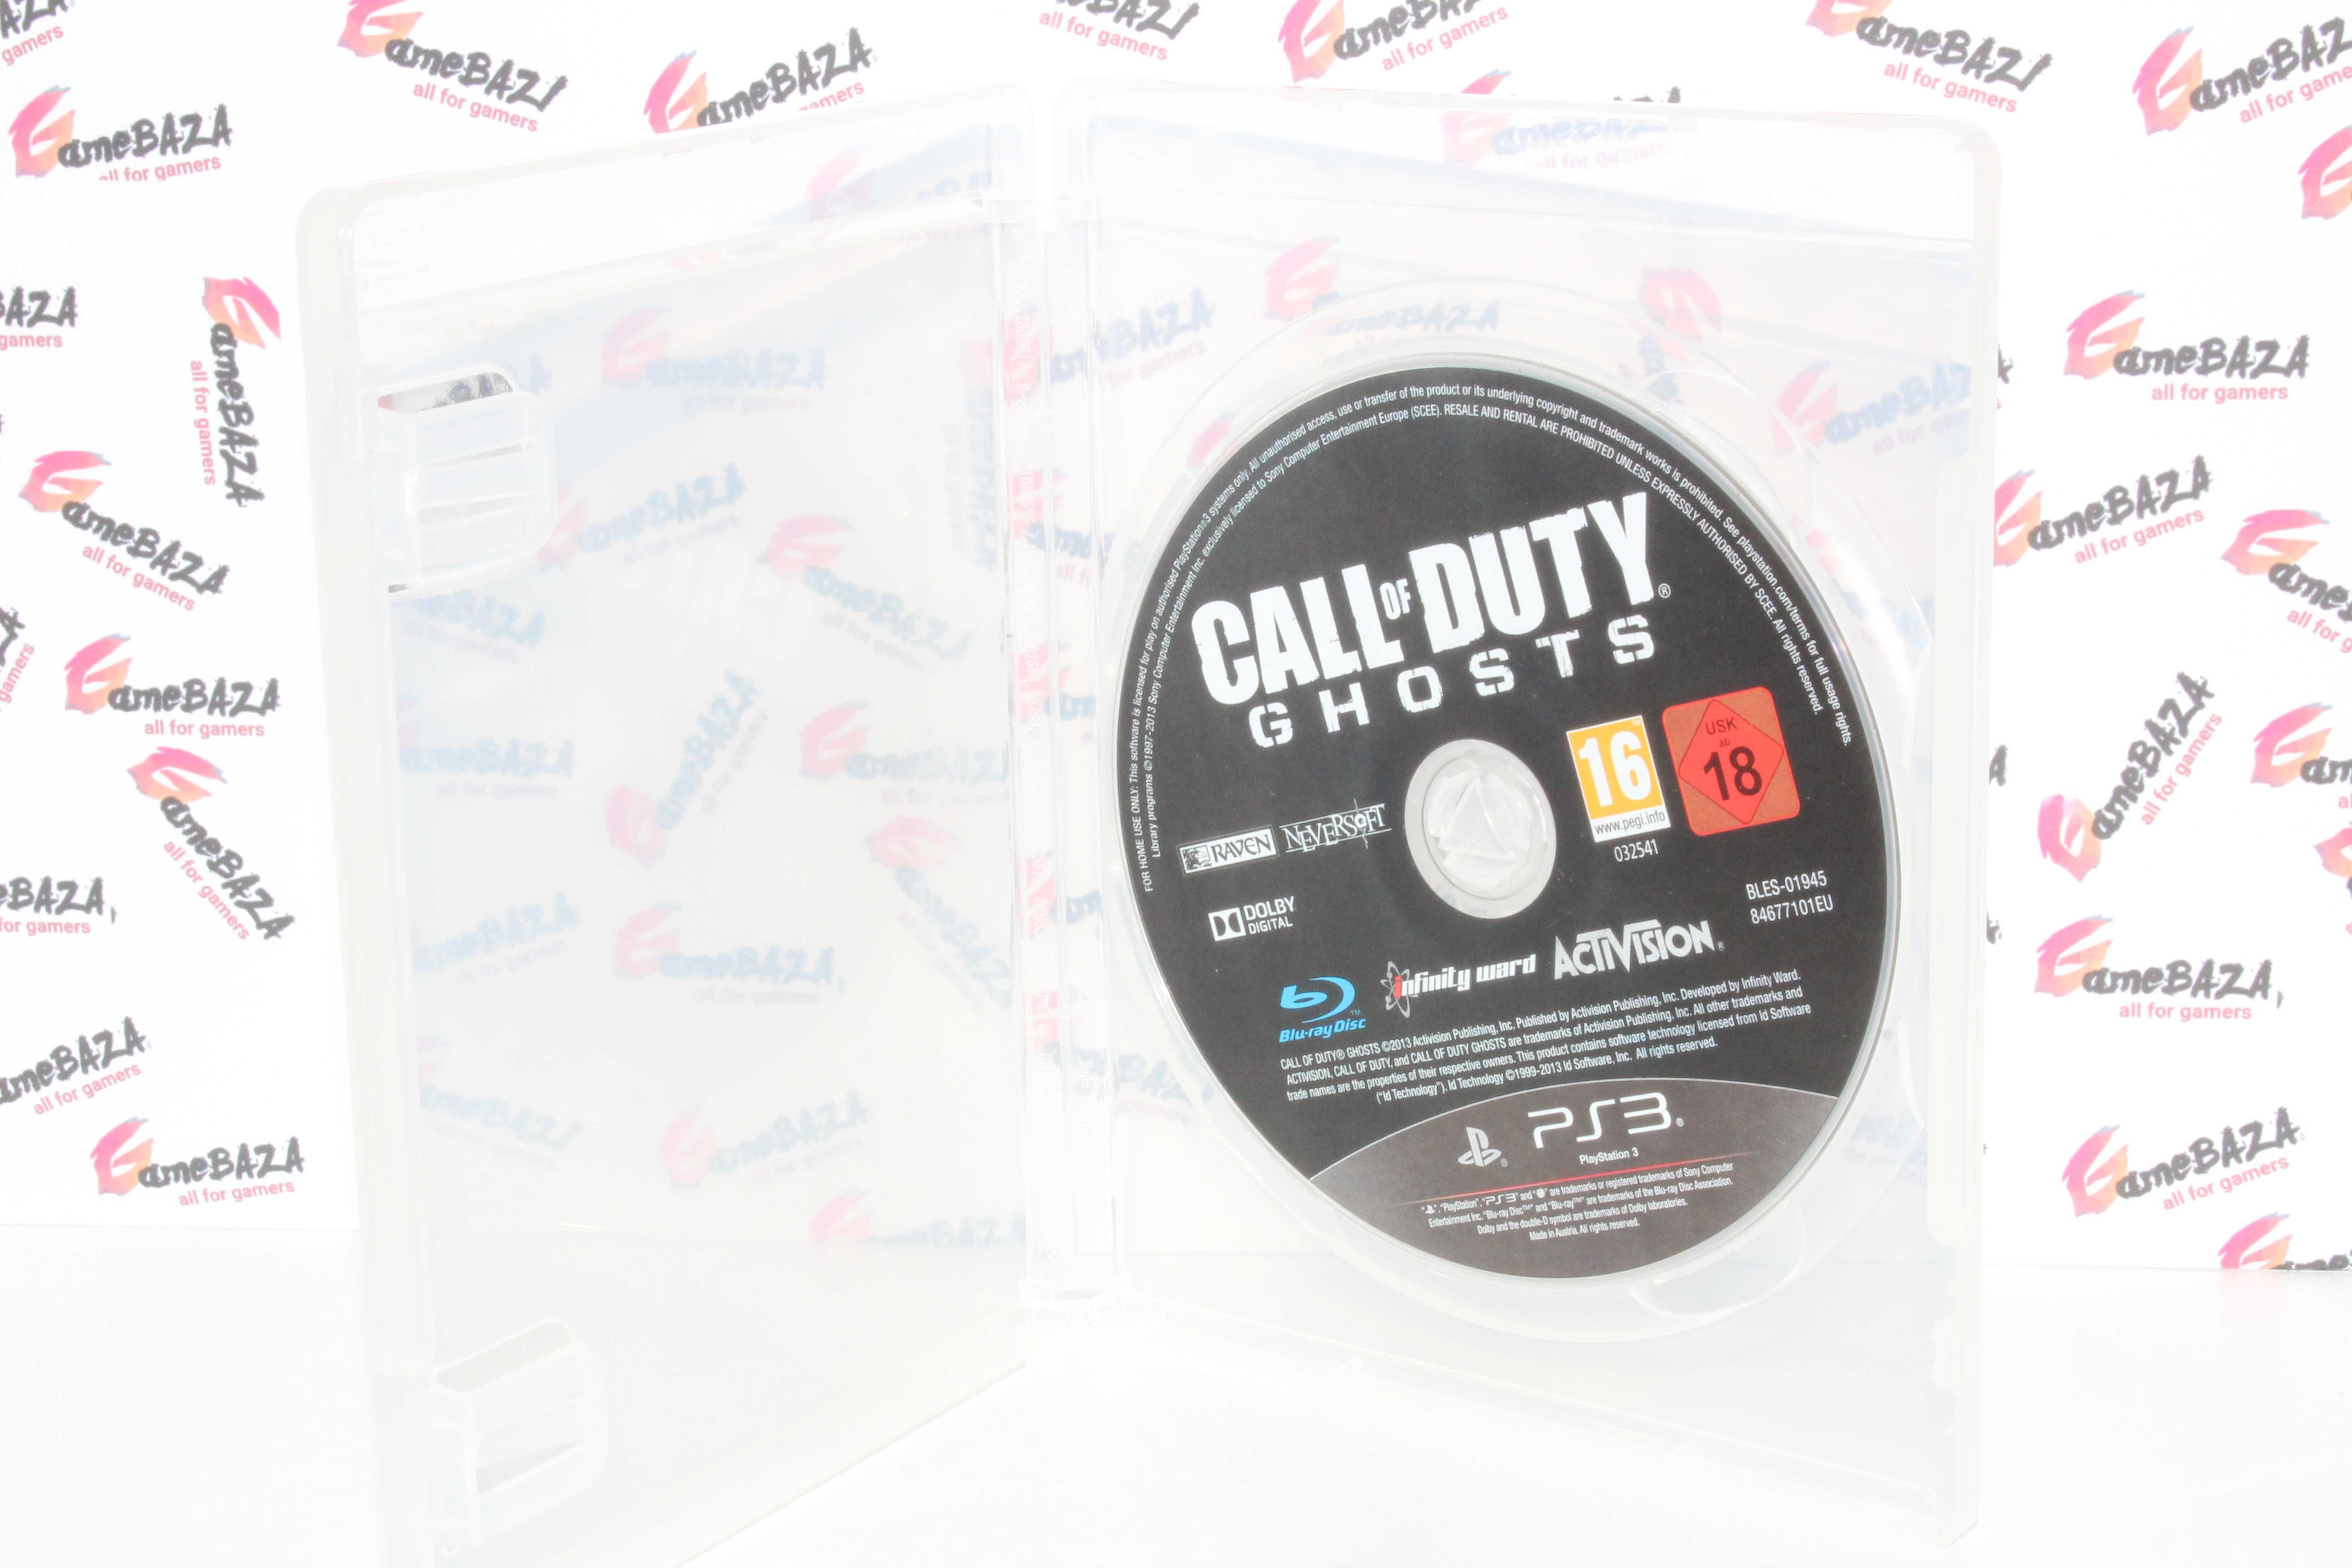 Call Of Duty Ghosts PS3 GameBAZA